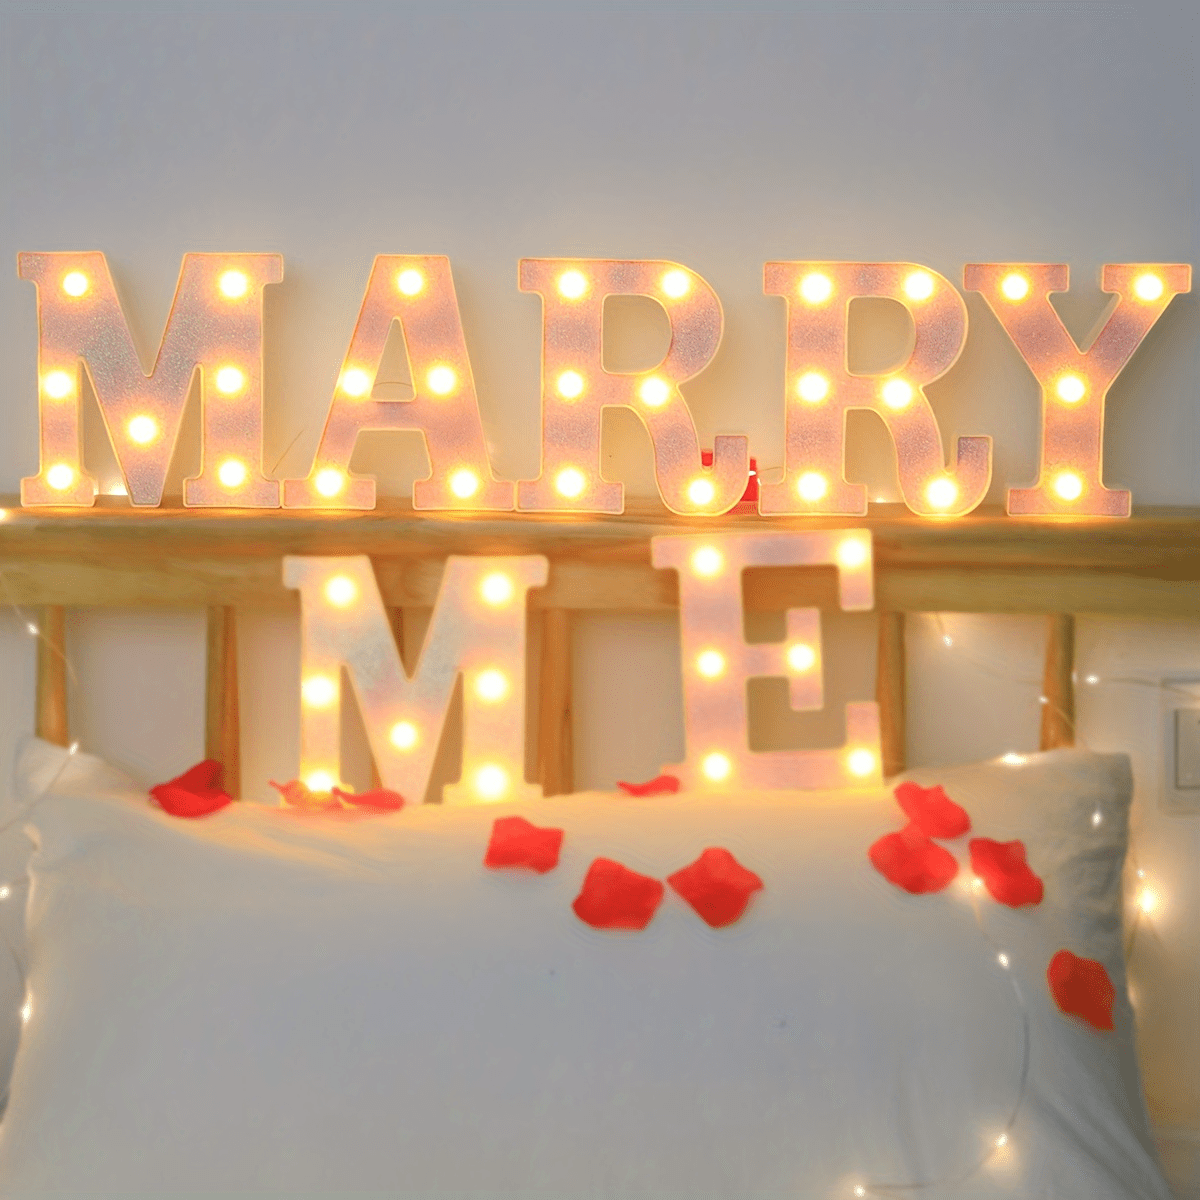 1pc Lighting Glowing Letters Light, LED Battery Powered Letter Light, For Bedroom Birthday Party Wedding Home Christmas Decoration details 1